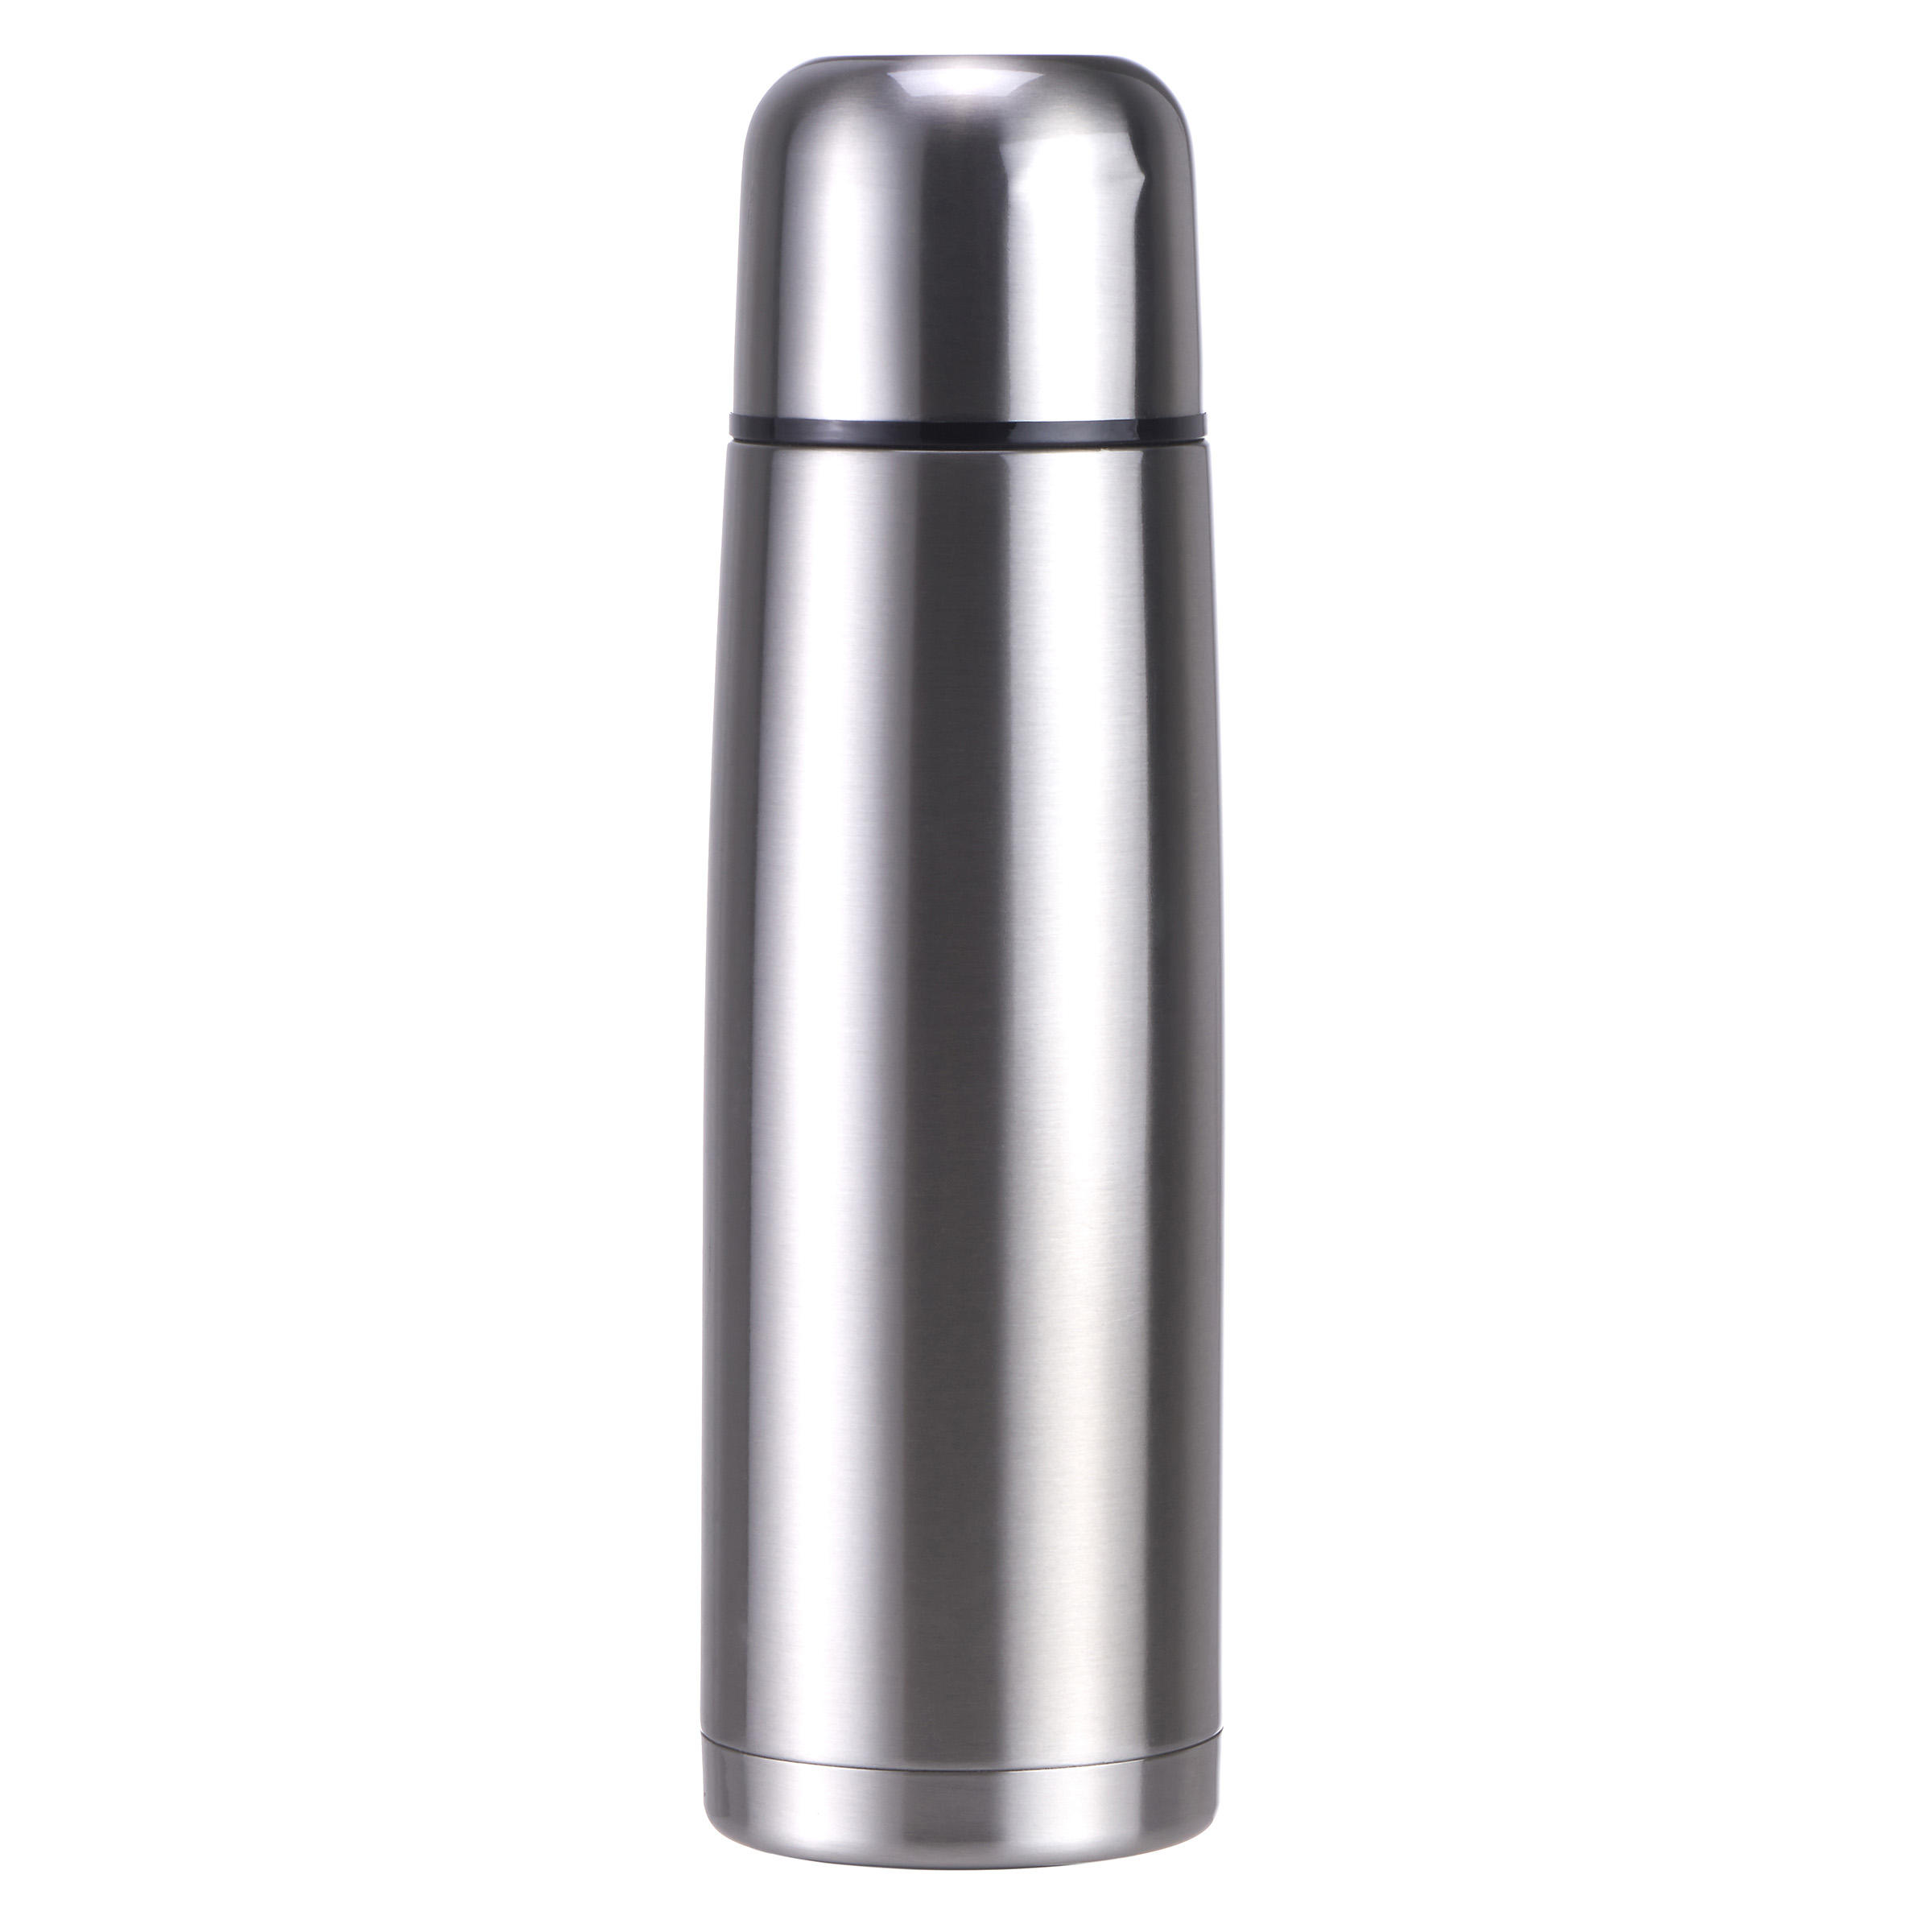 1 L stainless steel isothermal water bottle with cup for hiking - Silver 6/11